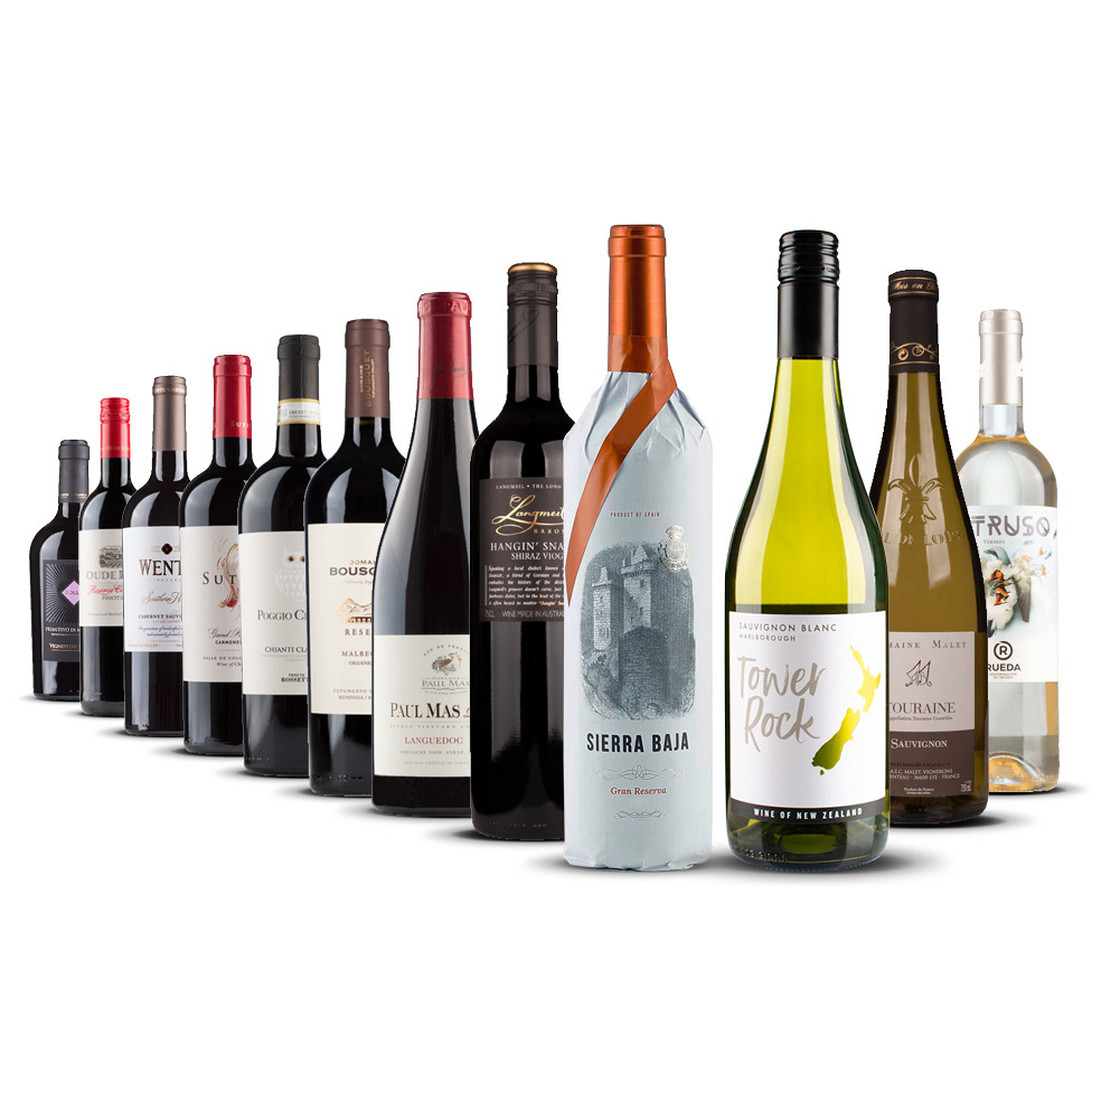 wein.plus Find+Buy: of our members wein.plus Find+Buy The wines 